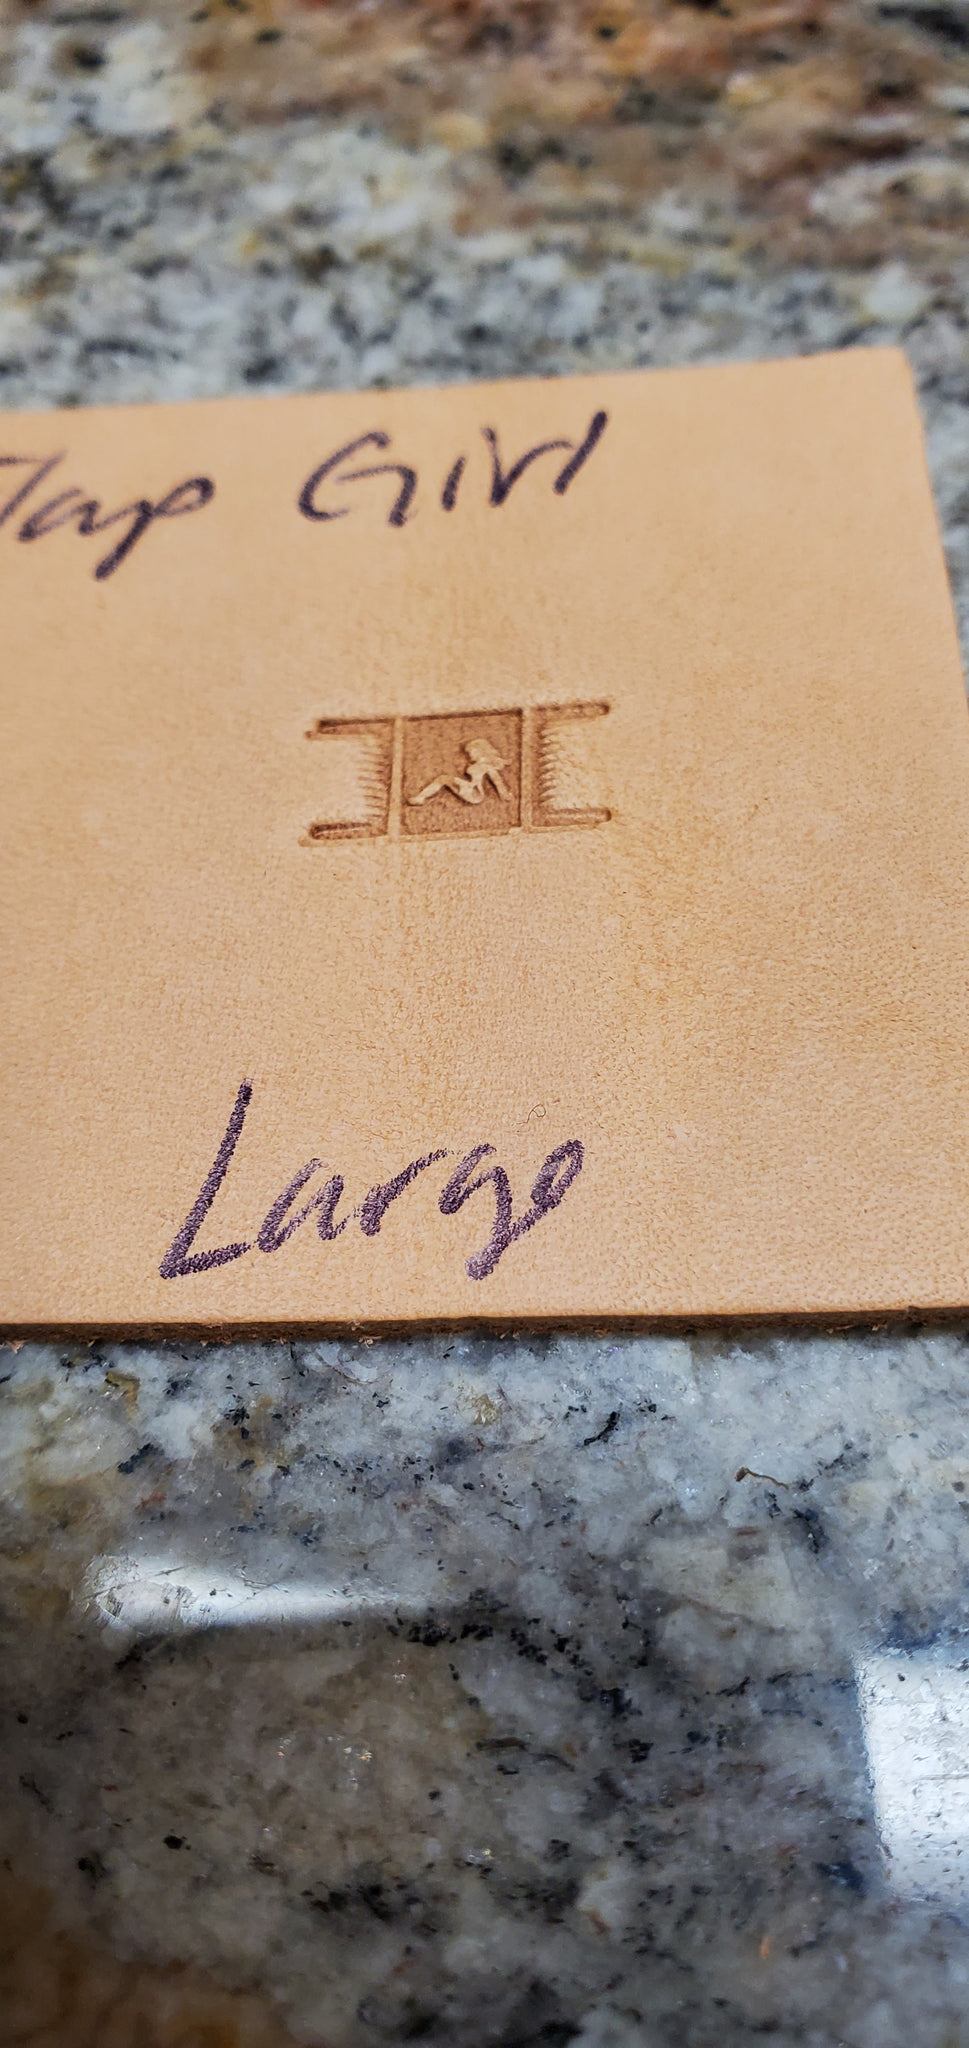 Barry King Basket Stamps – Panhandle Leather Co.